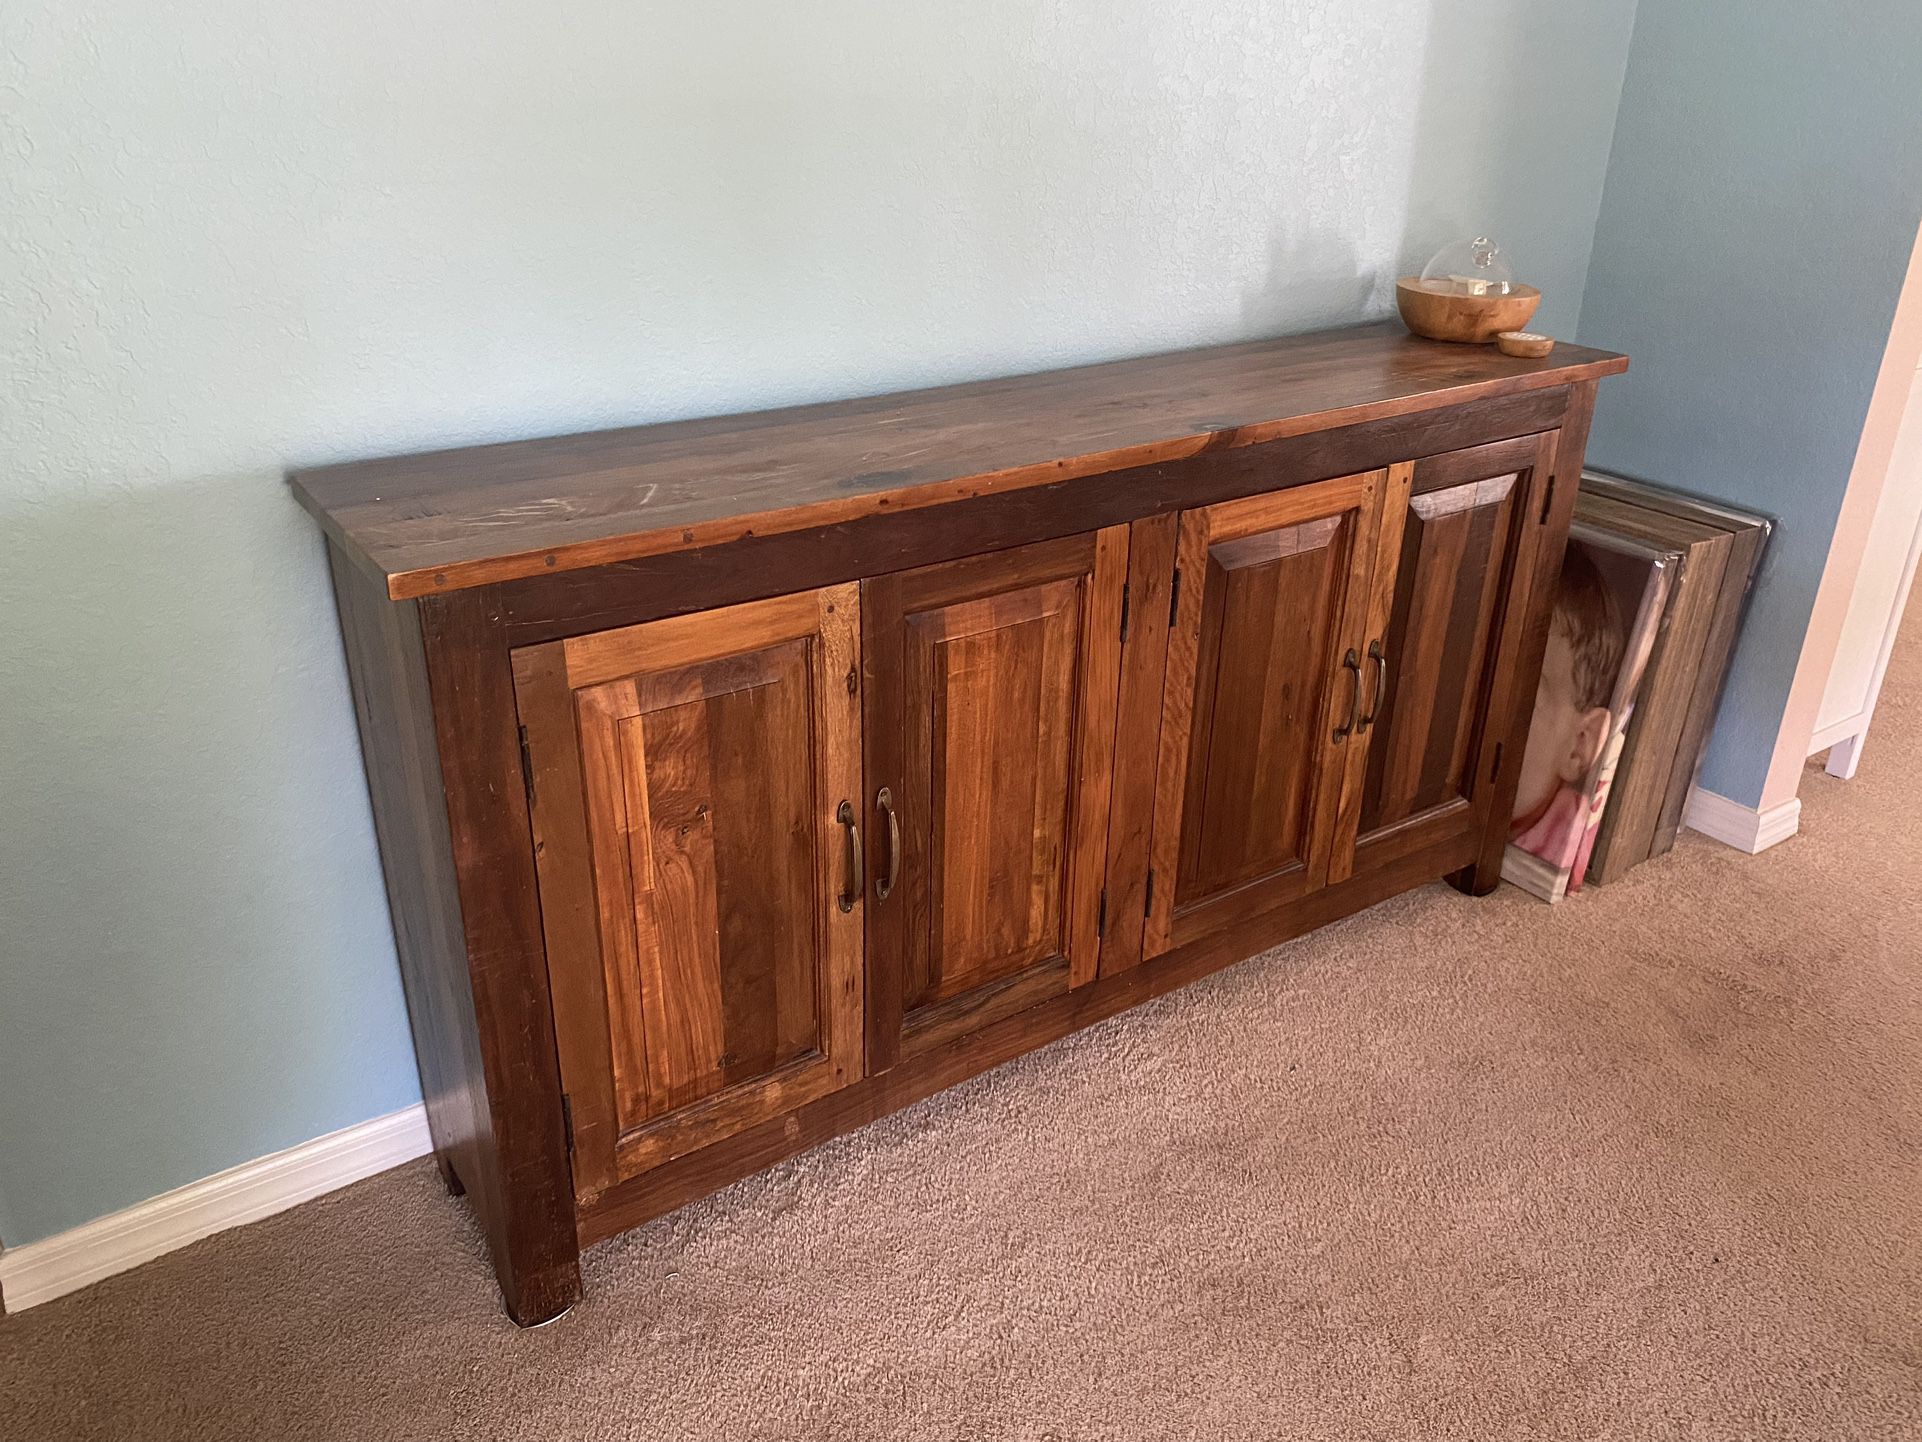 !POTTERY BARN! Heirloom Quality Bowry Collection Pottery Barn SIDEBOARD/BUFFET Cabinet  - Full hardwood Construction, NO particleboard or Laminate! 